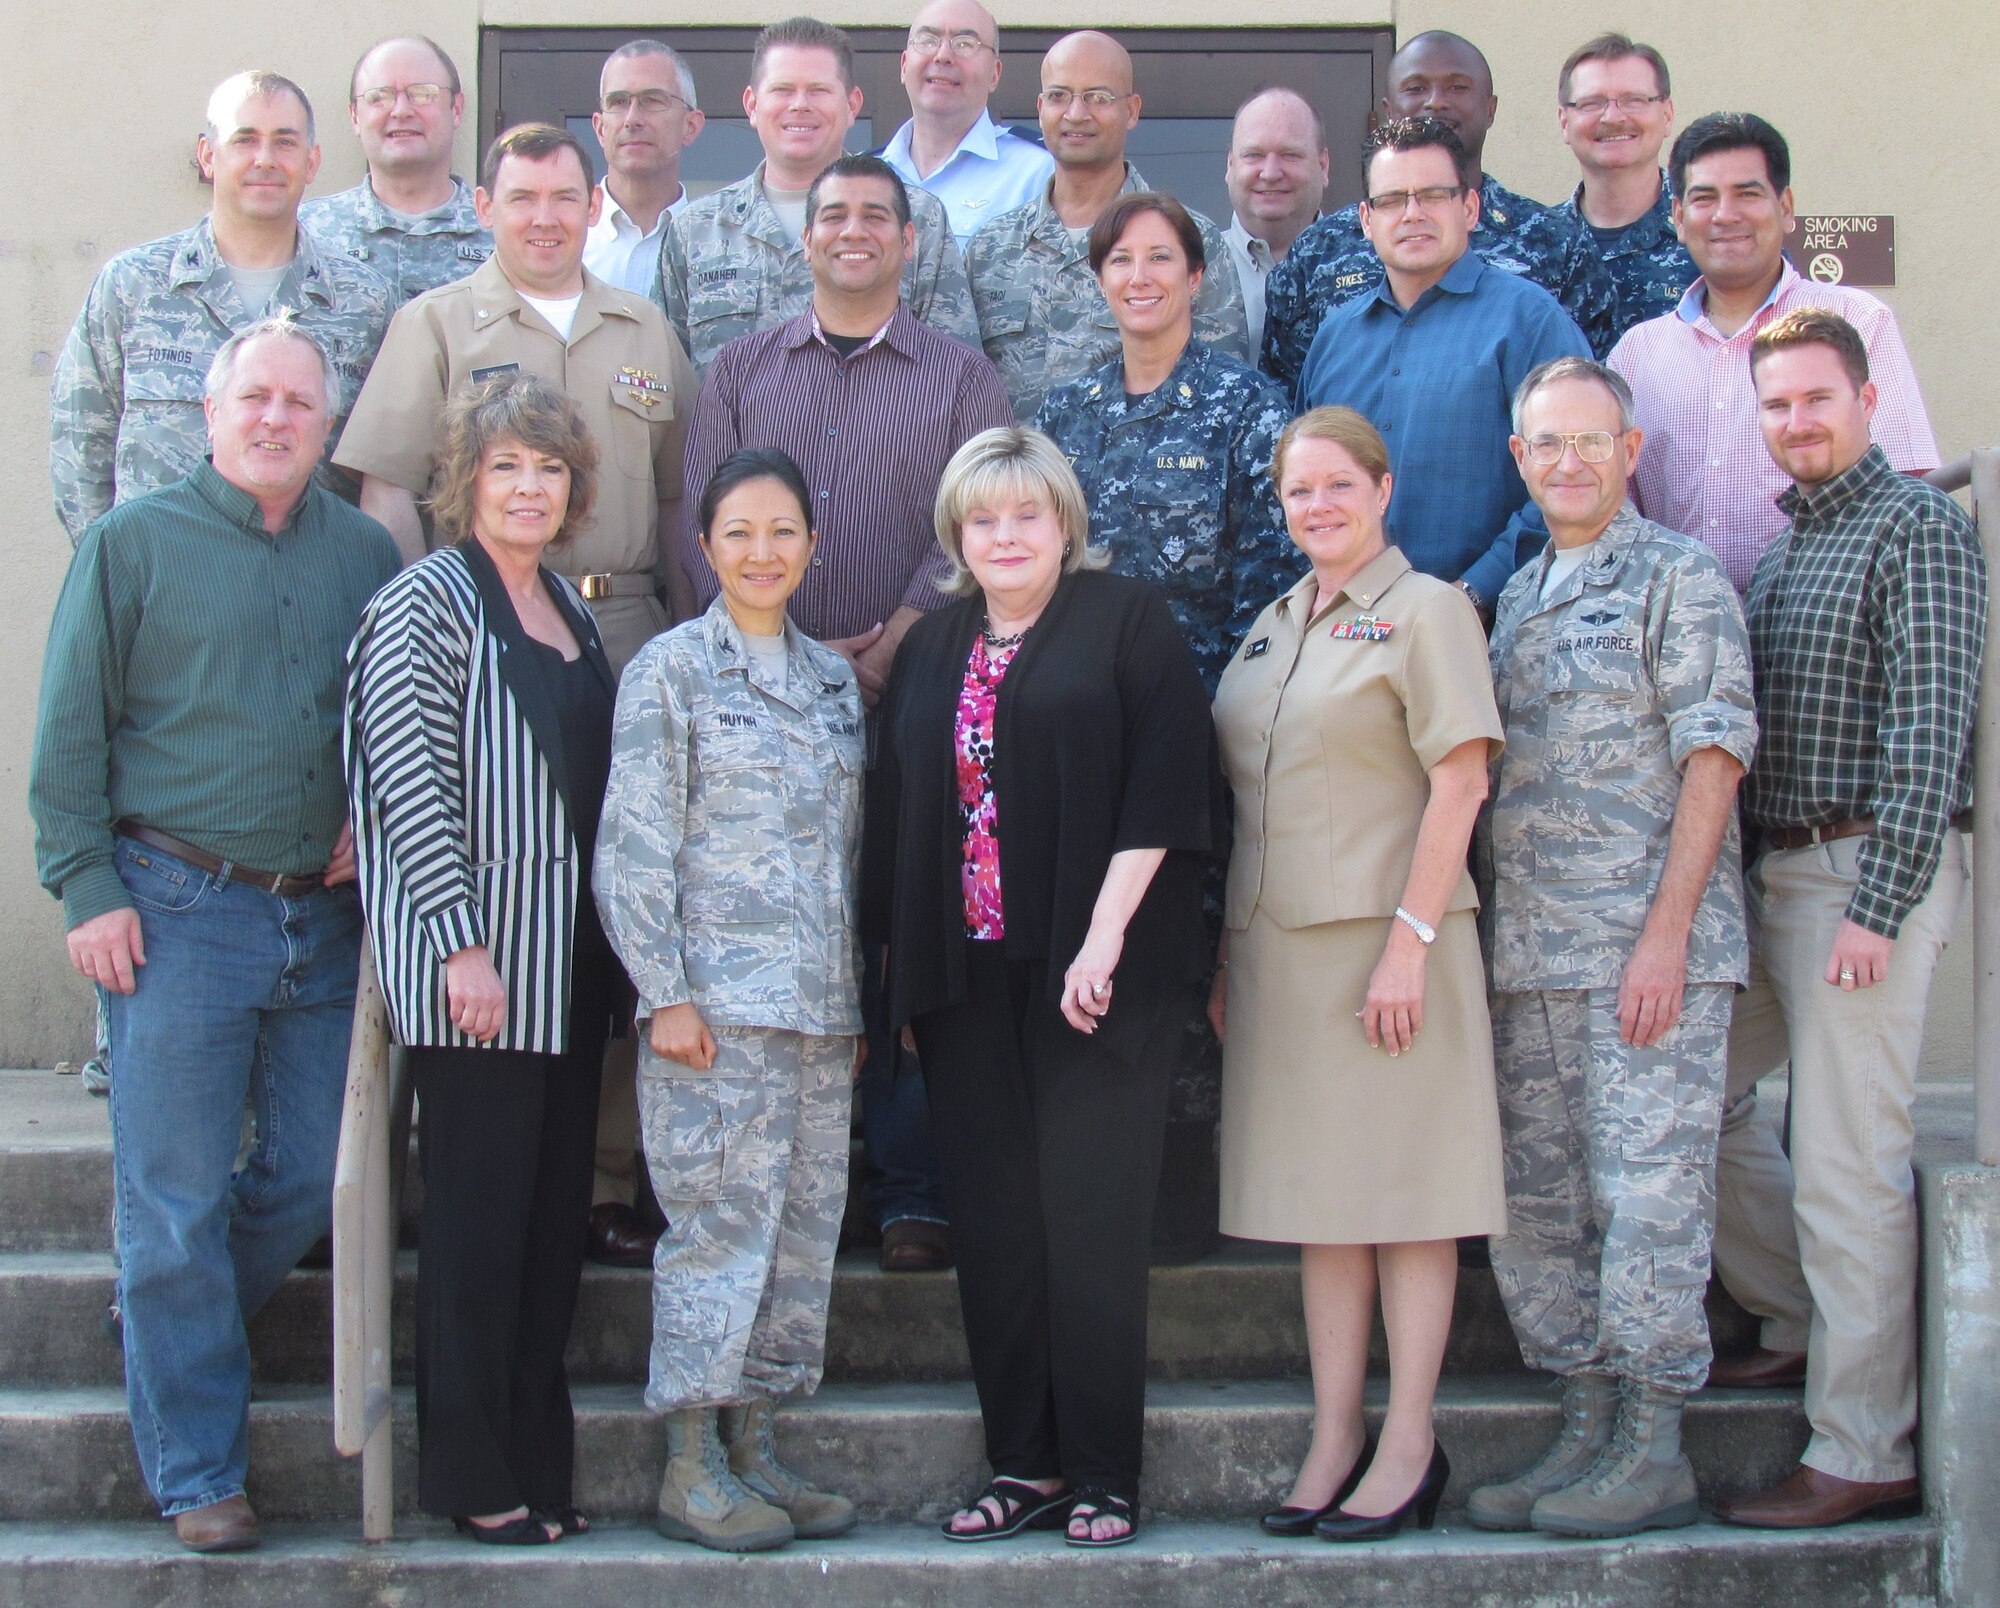 Representatives from the Defense Security Cooperation Agency (DSCA), Joint Staff Surgeon’s office, Air Staff, U.S. Army Medical Command, and the U.S. Navy Bureau of Medicine gathered recently at Joint Base San Antonio – Lackland for a strategic planning meeting held in conjunction with the 10th anniversary of the founding of the Defense Institute for Medical Operations (DIMO).  (AF Courtesy Photo)